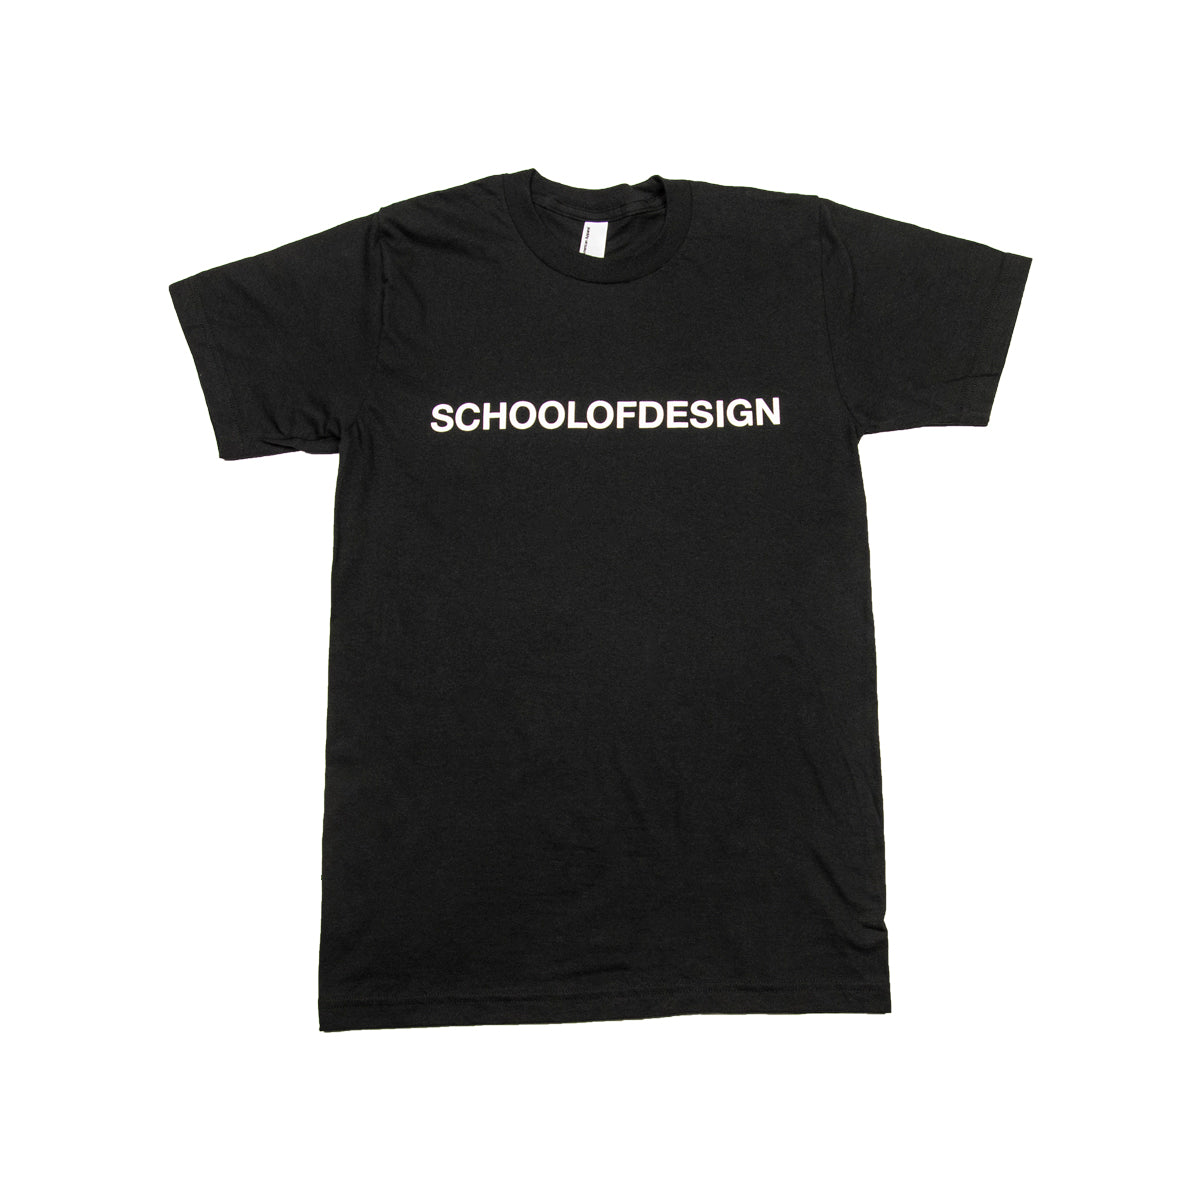 100% cotton black t shirt with school of design white text on chest